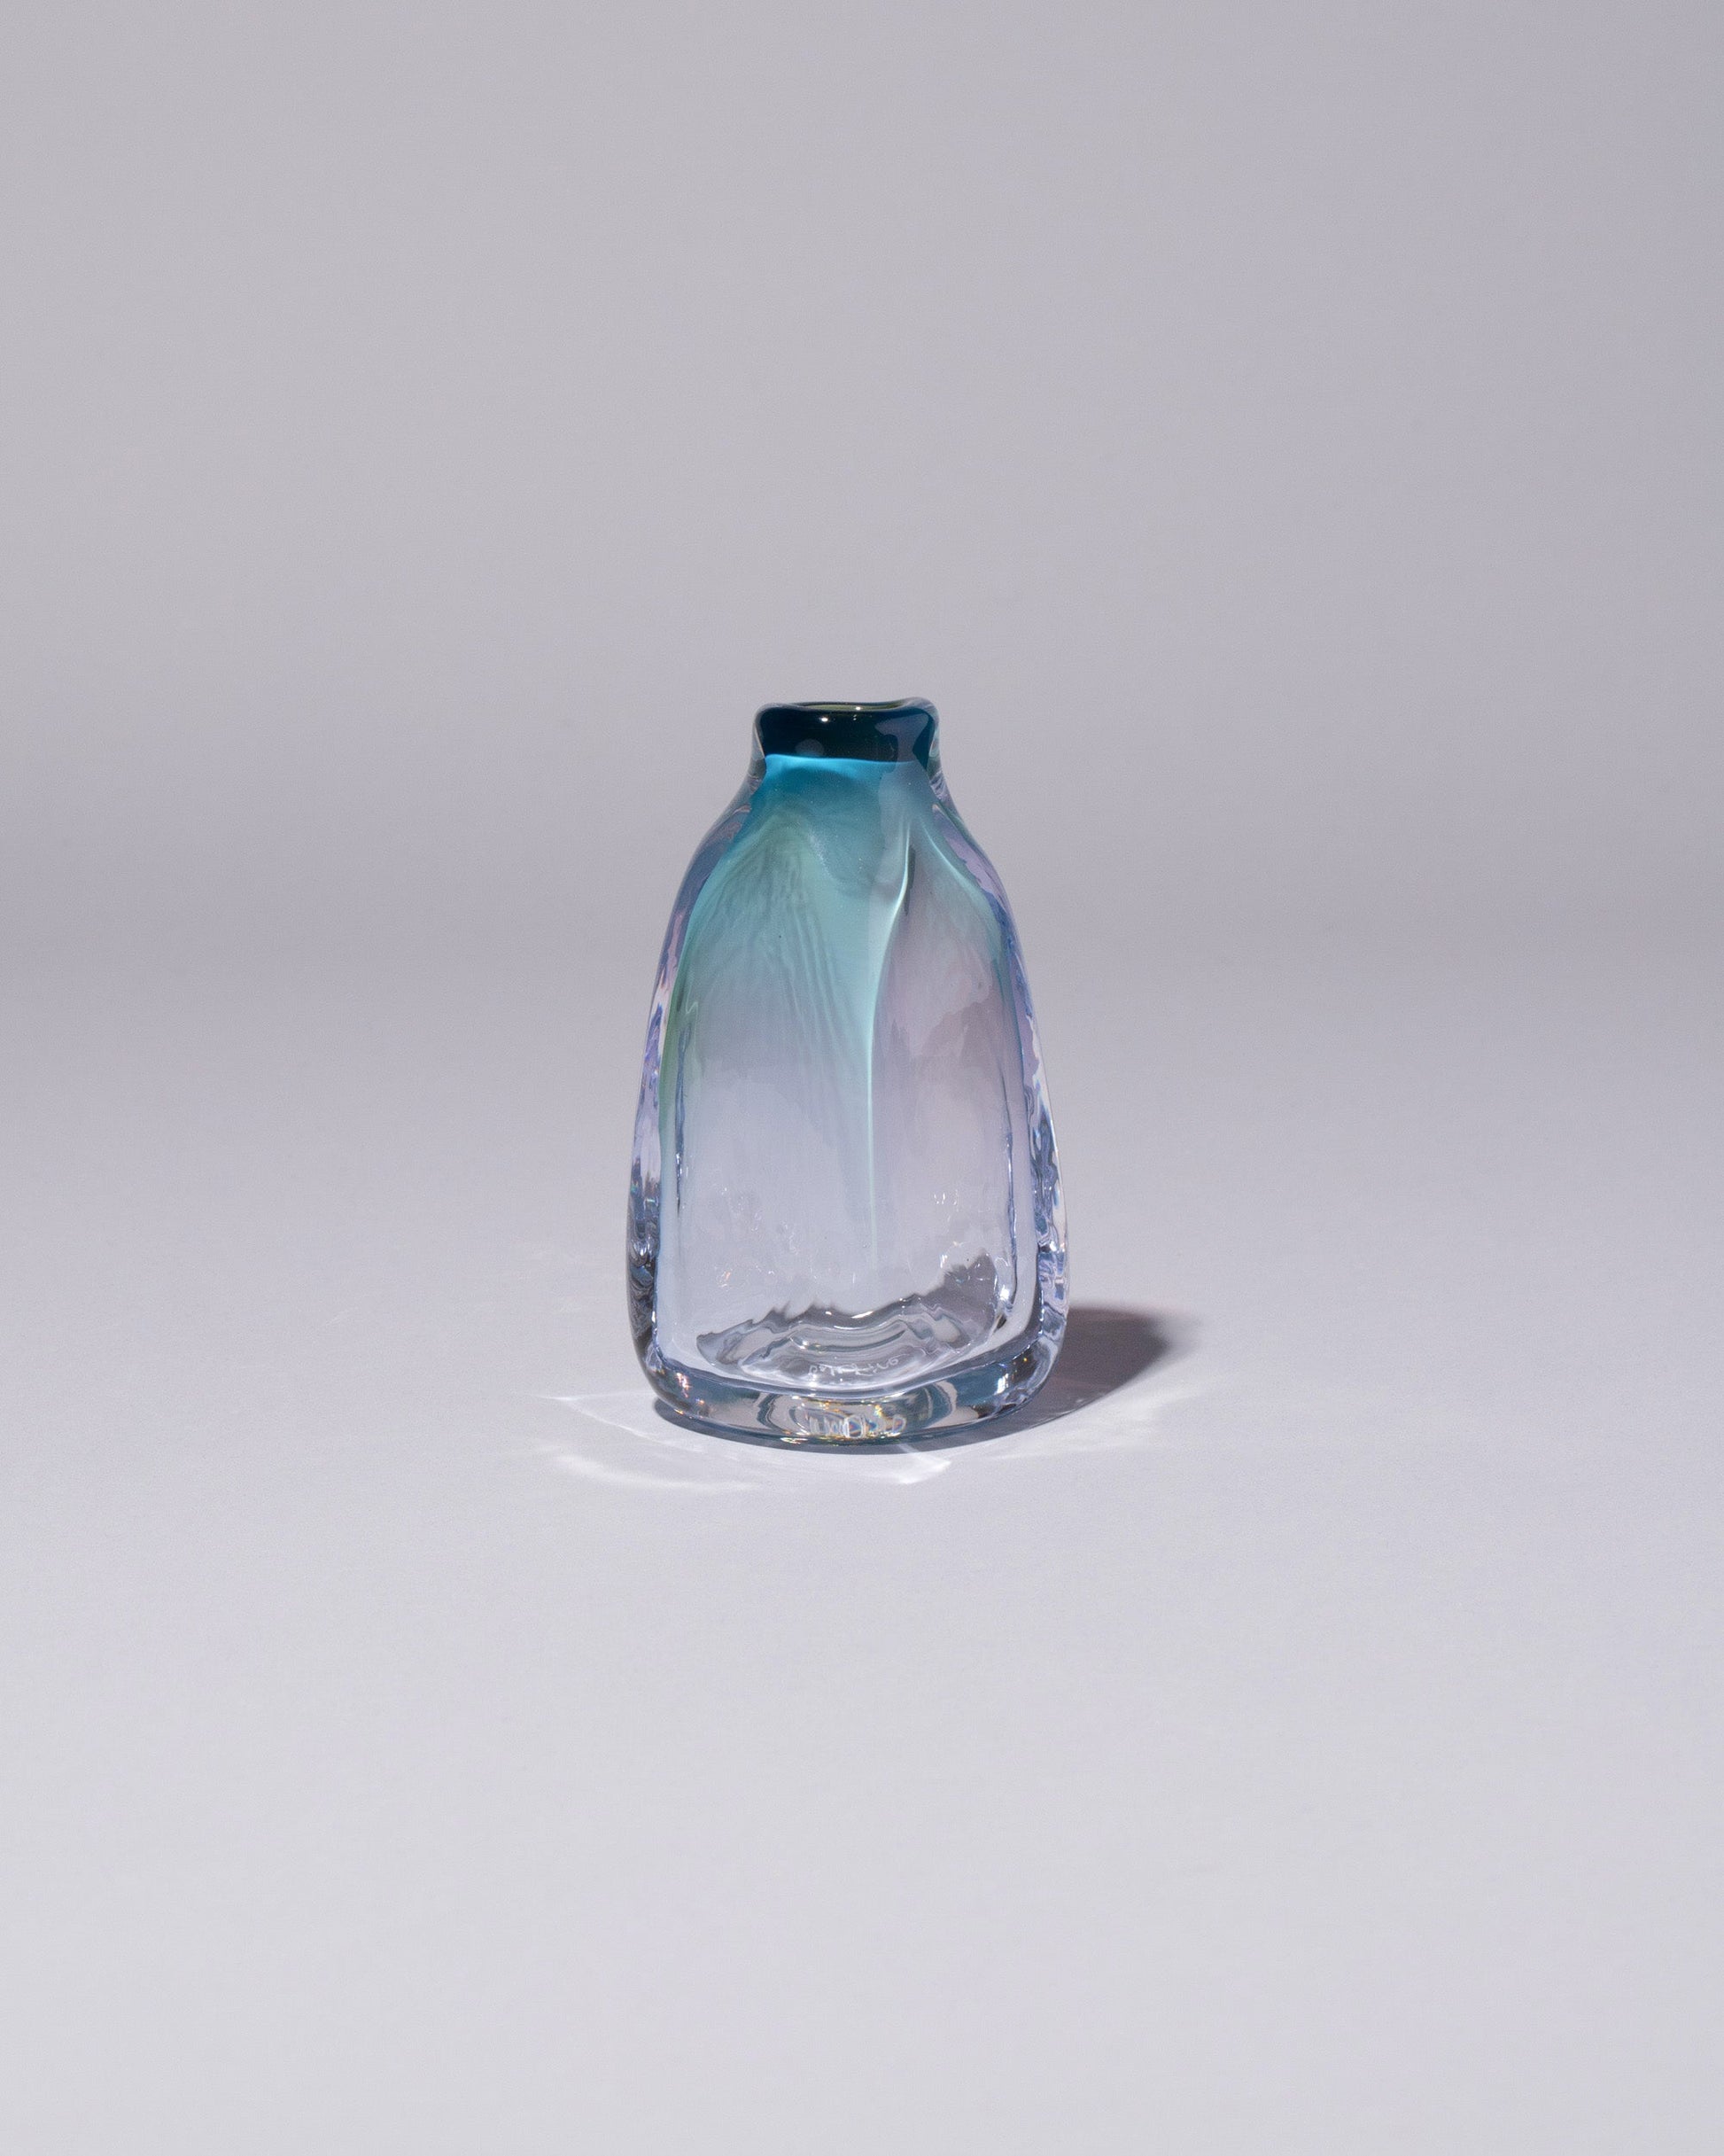 BaleFire Glass Small Miracle Blue Suspension Vase on light color background.